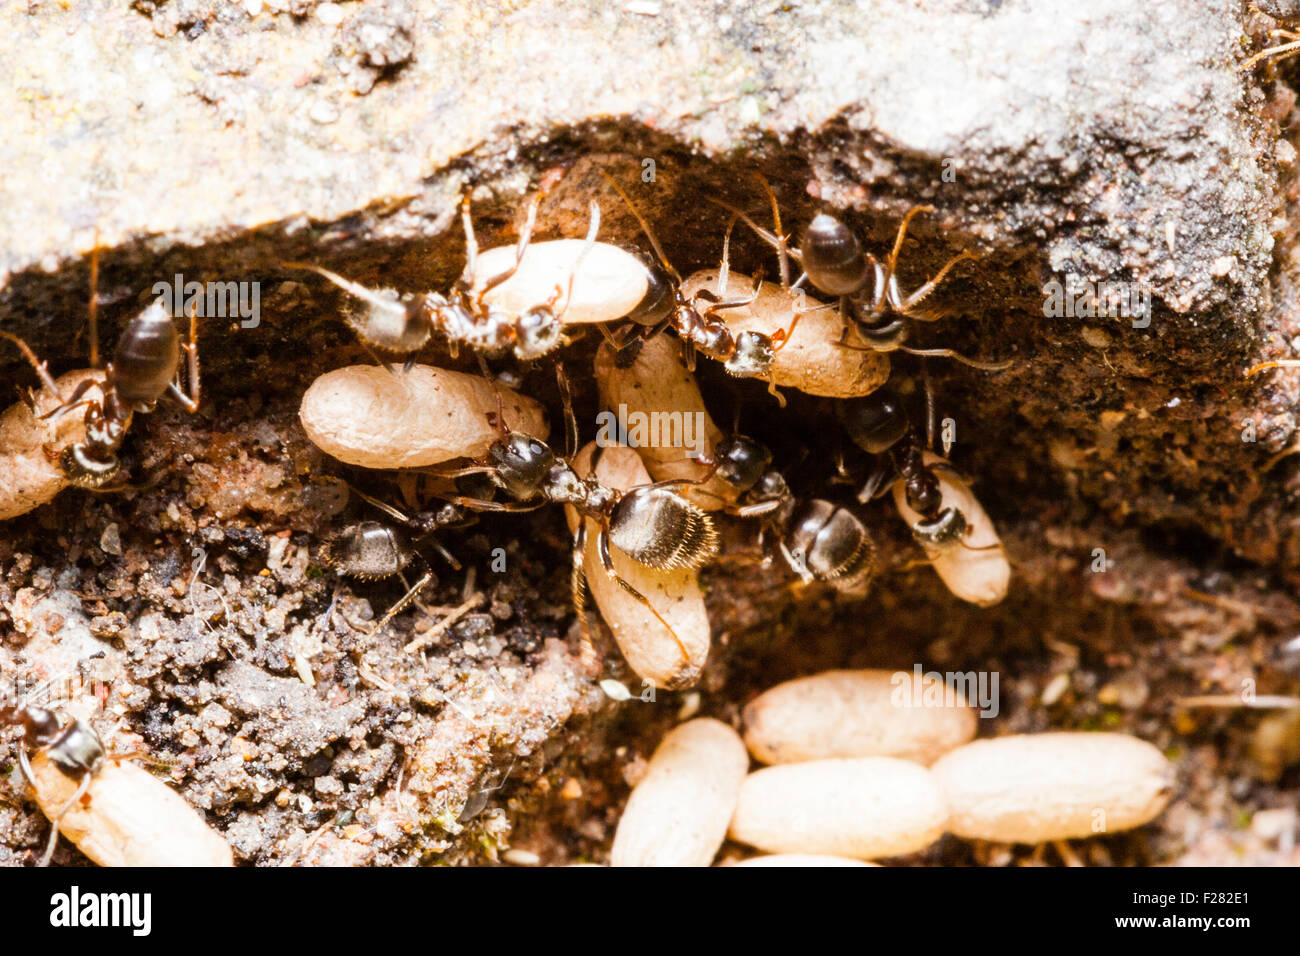 Insect. Overhead close up view of Black garden ants 'Lasius niger', disturbed nest, ants walking over egg pile, picking them up and carrying them off. Stock Photo